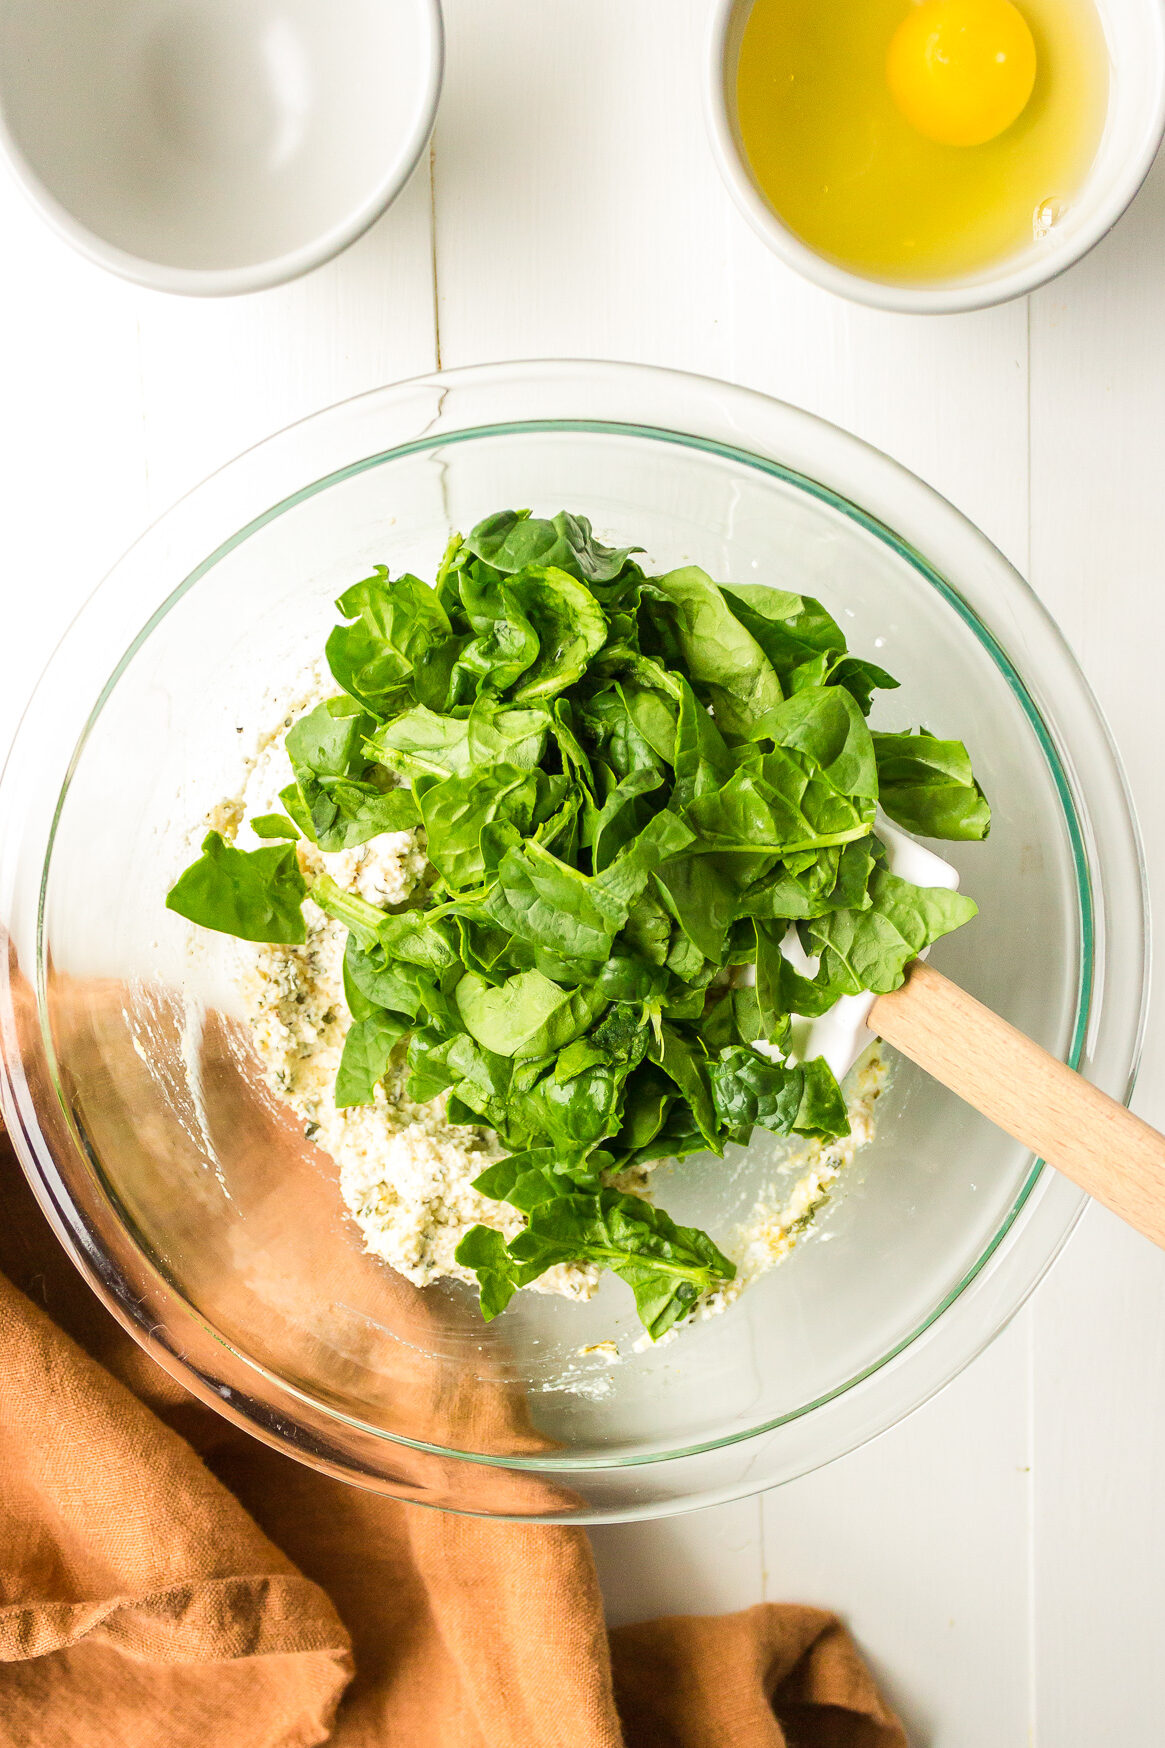 A large glass mixing bowl filled with spinach being mixed into a ricotta mixture with an egg in a bowl nearby.